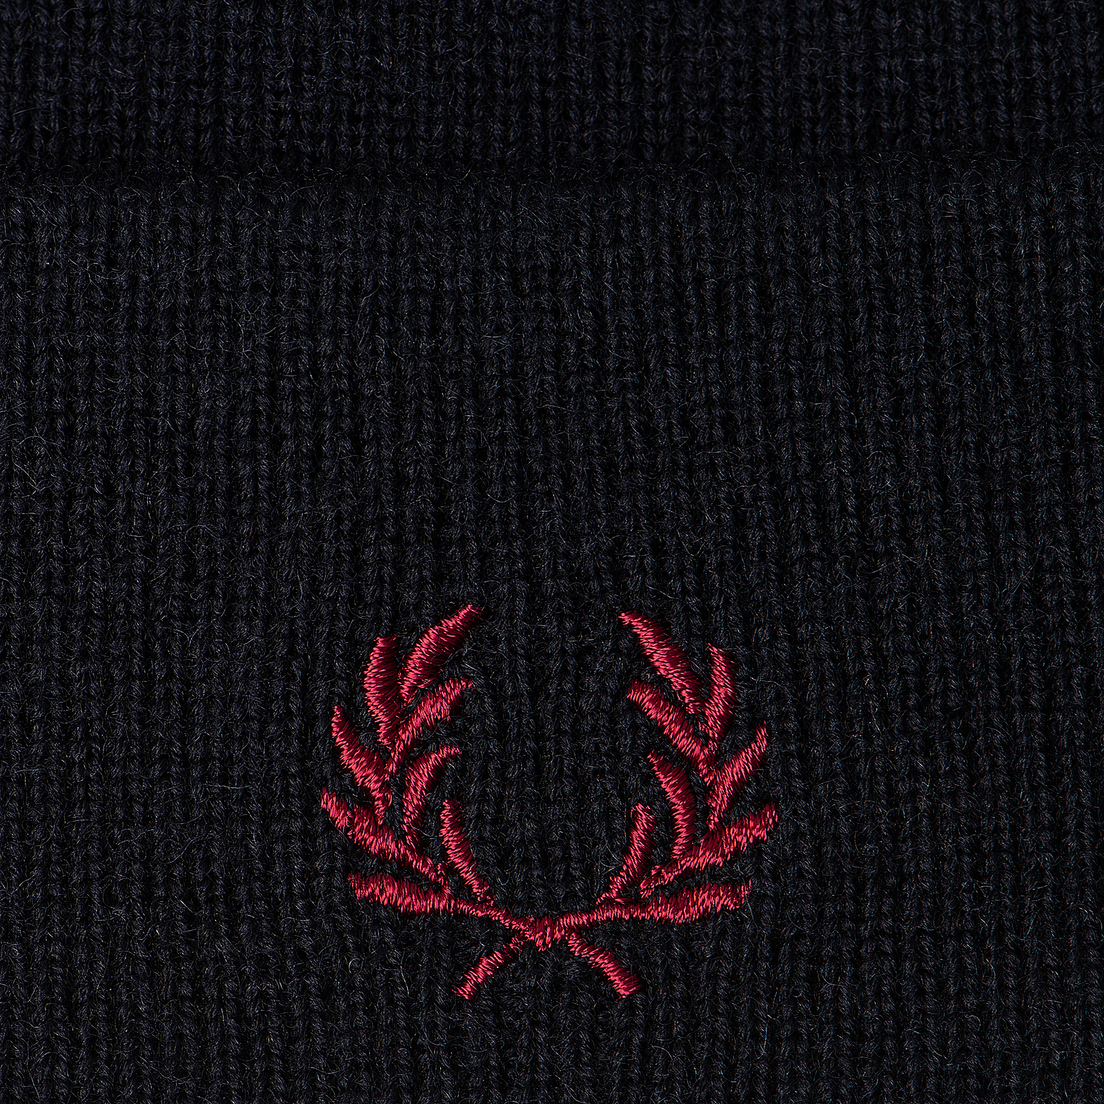 Fred Perry Шапка Merino Wool